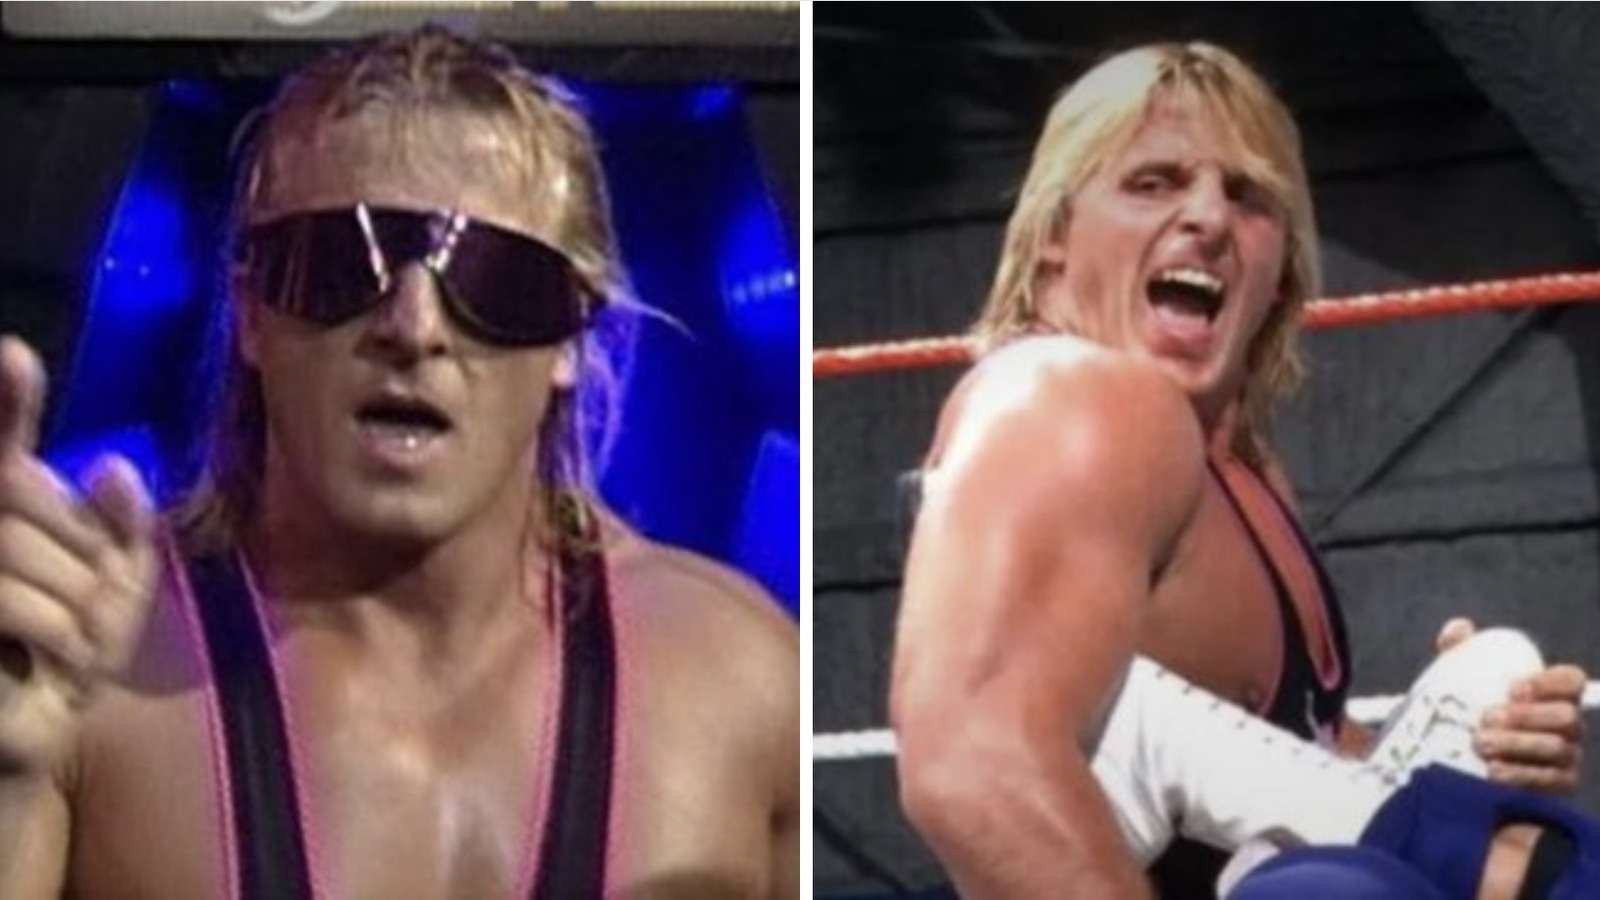 Remembering Owen Hart on the 25th anniversary of his tragic WWE death